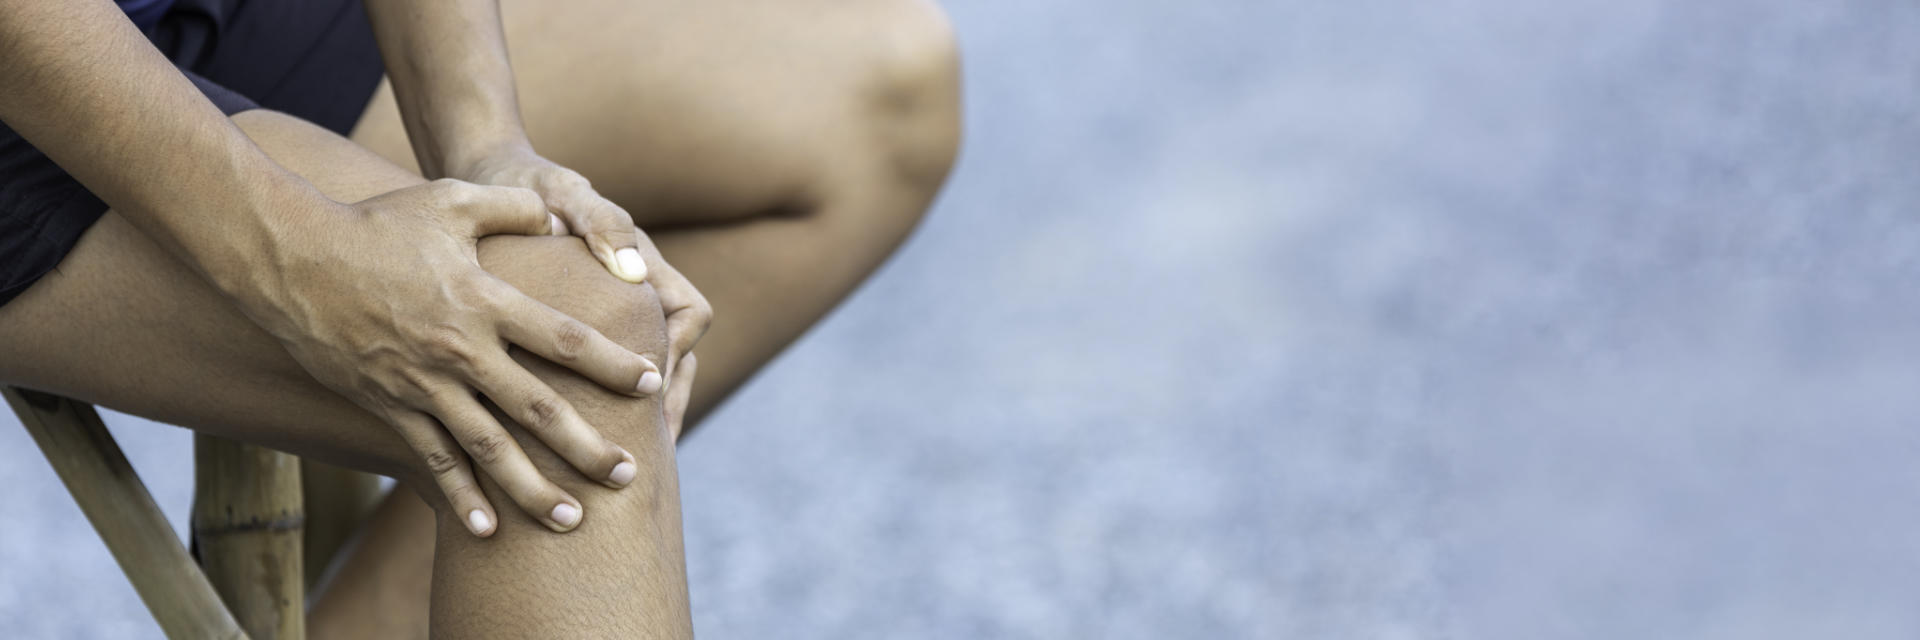 A person holding knee in pain.